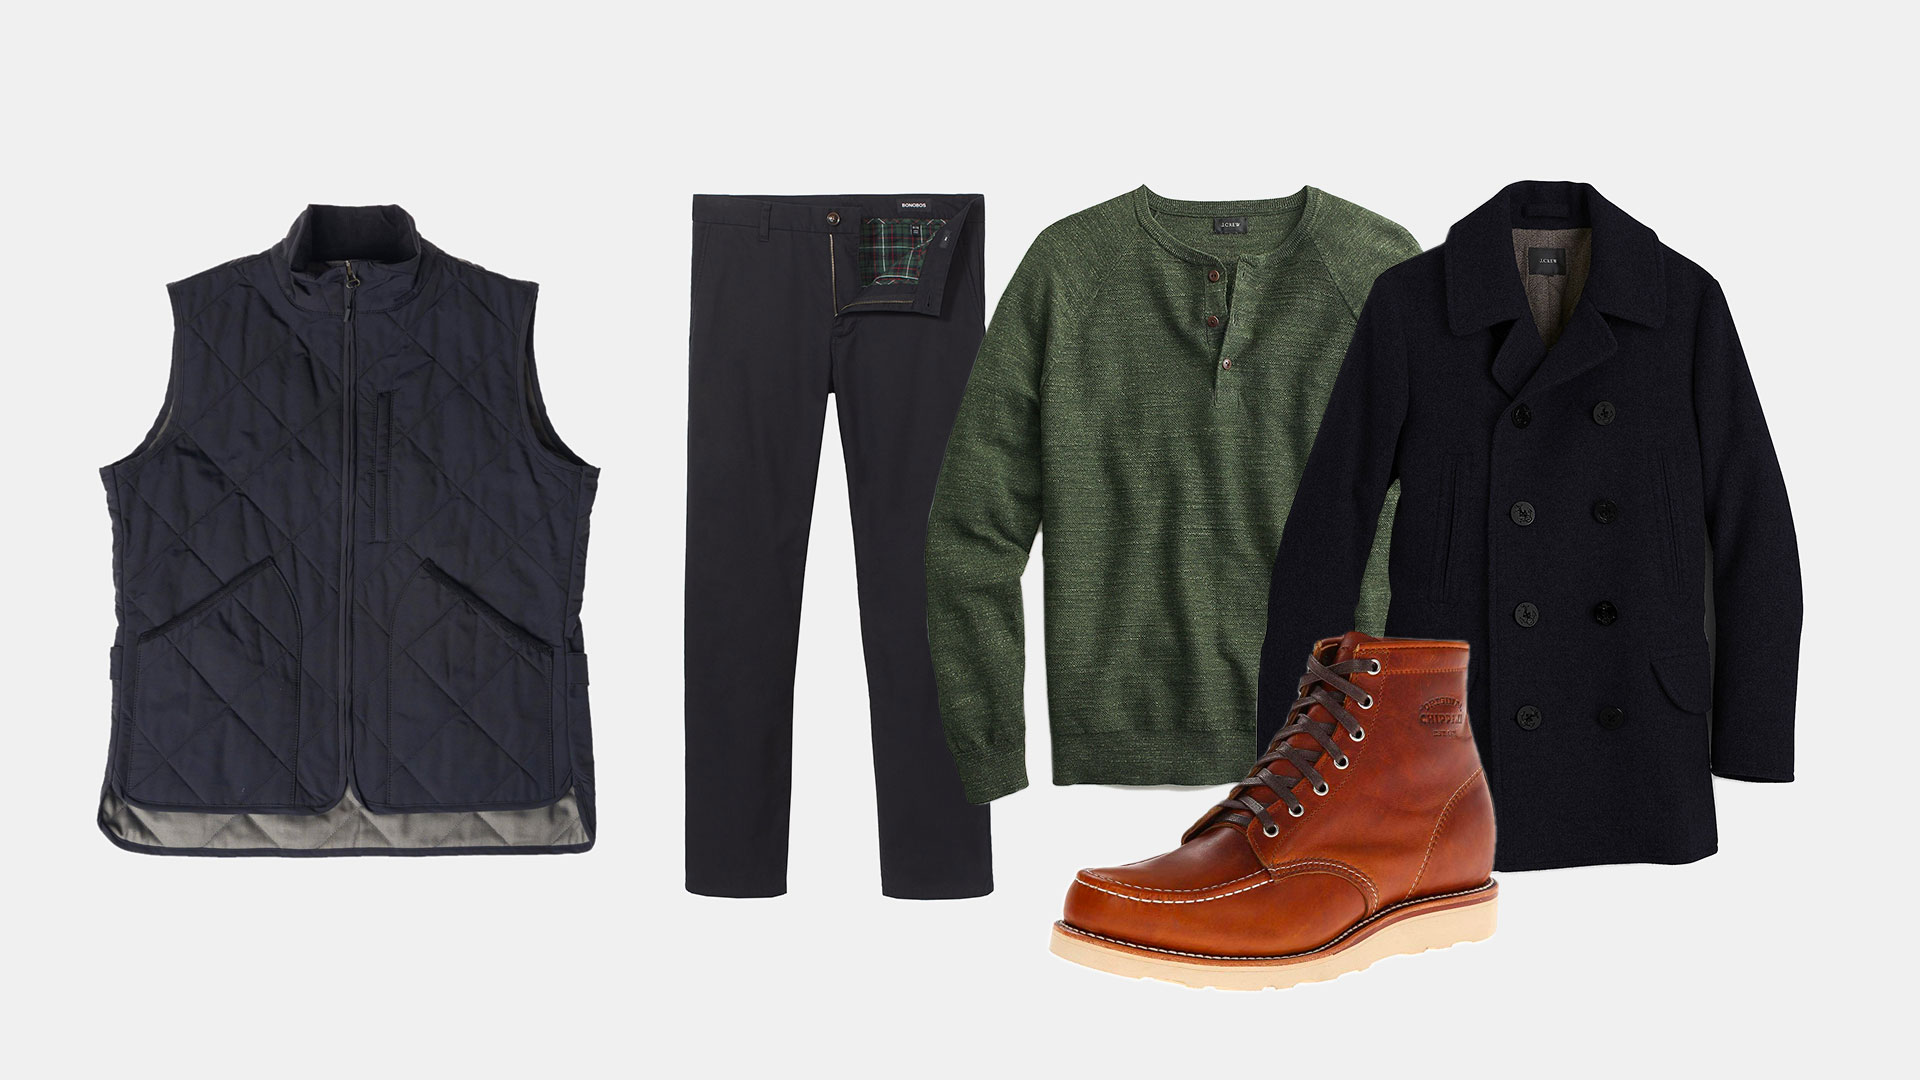 navy quilted vest flannel lined gray chinos green henley sweater navy pea coat and tan moc toe boots